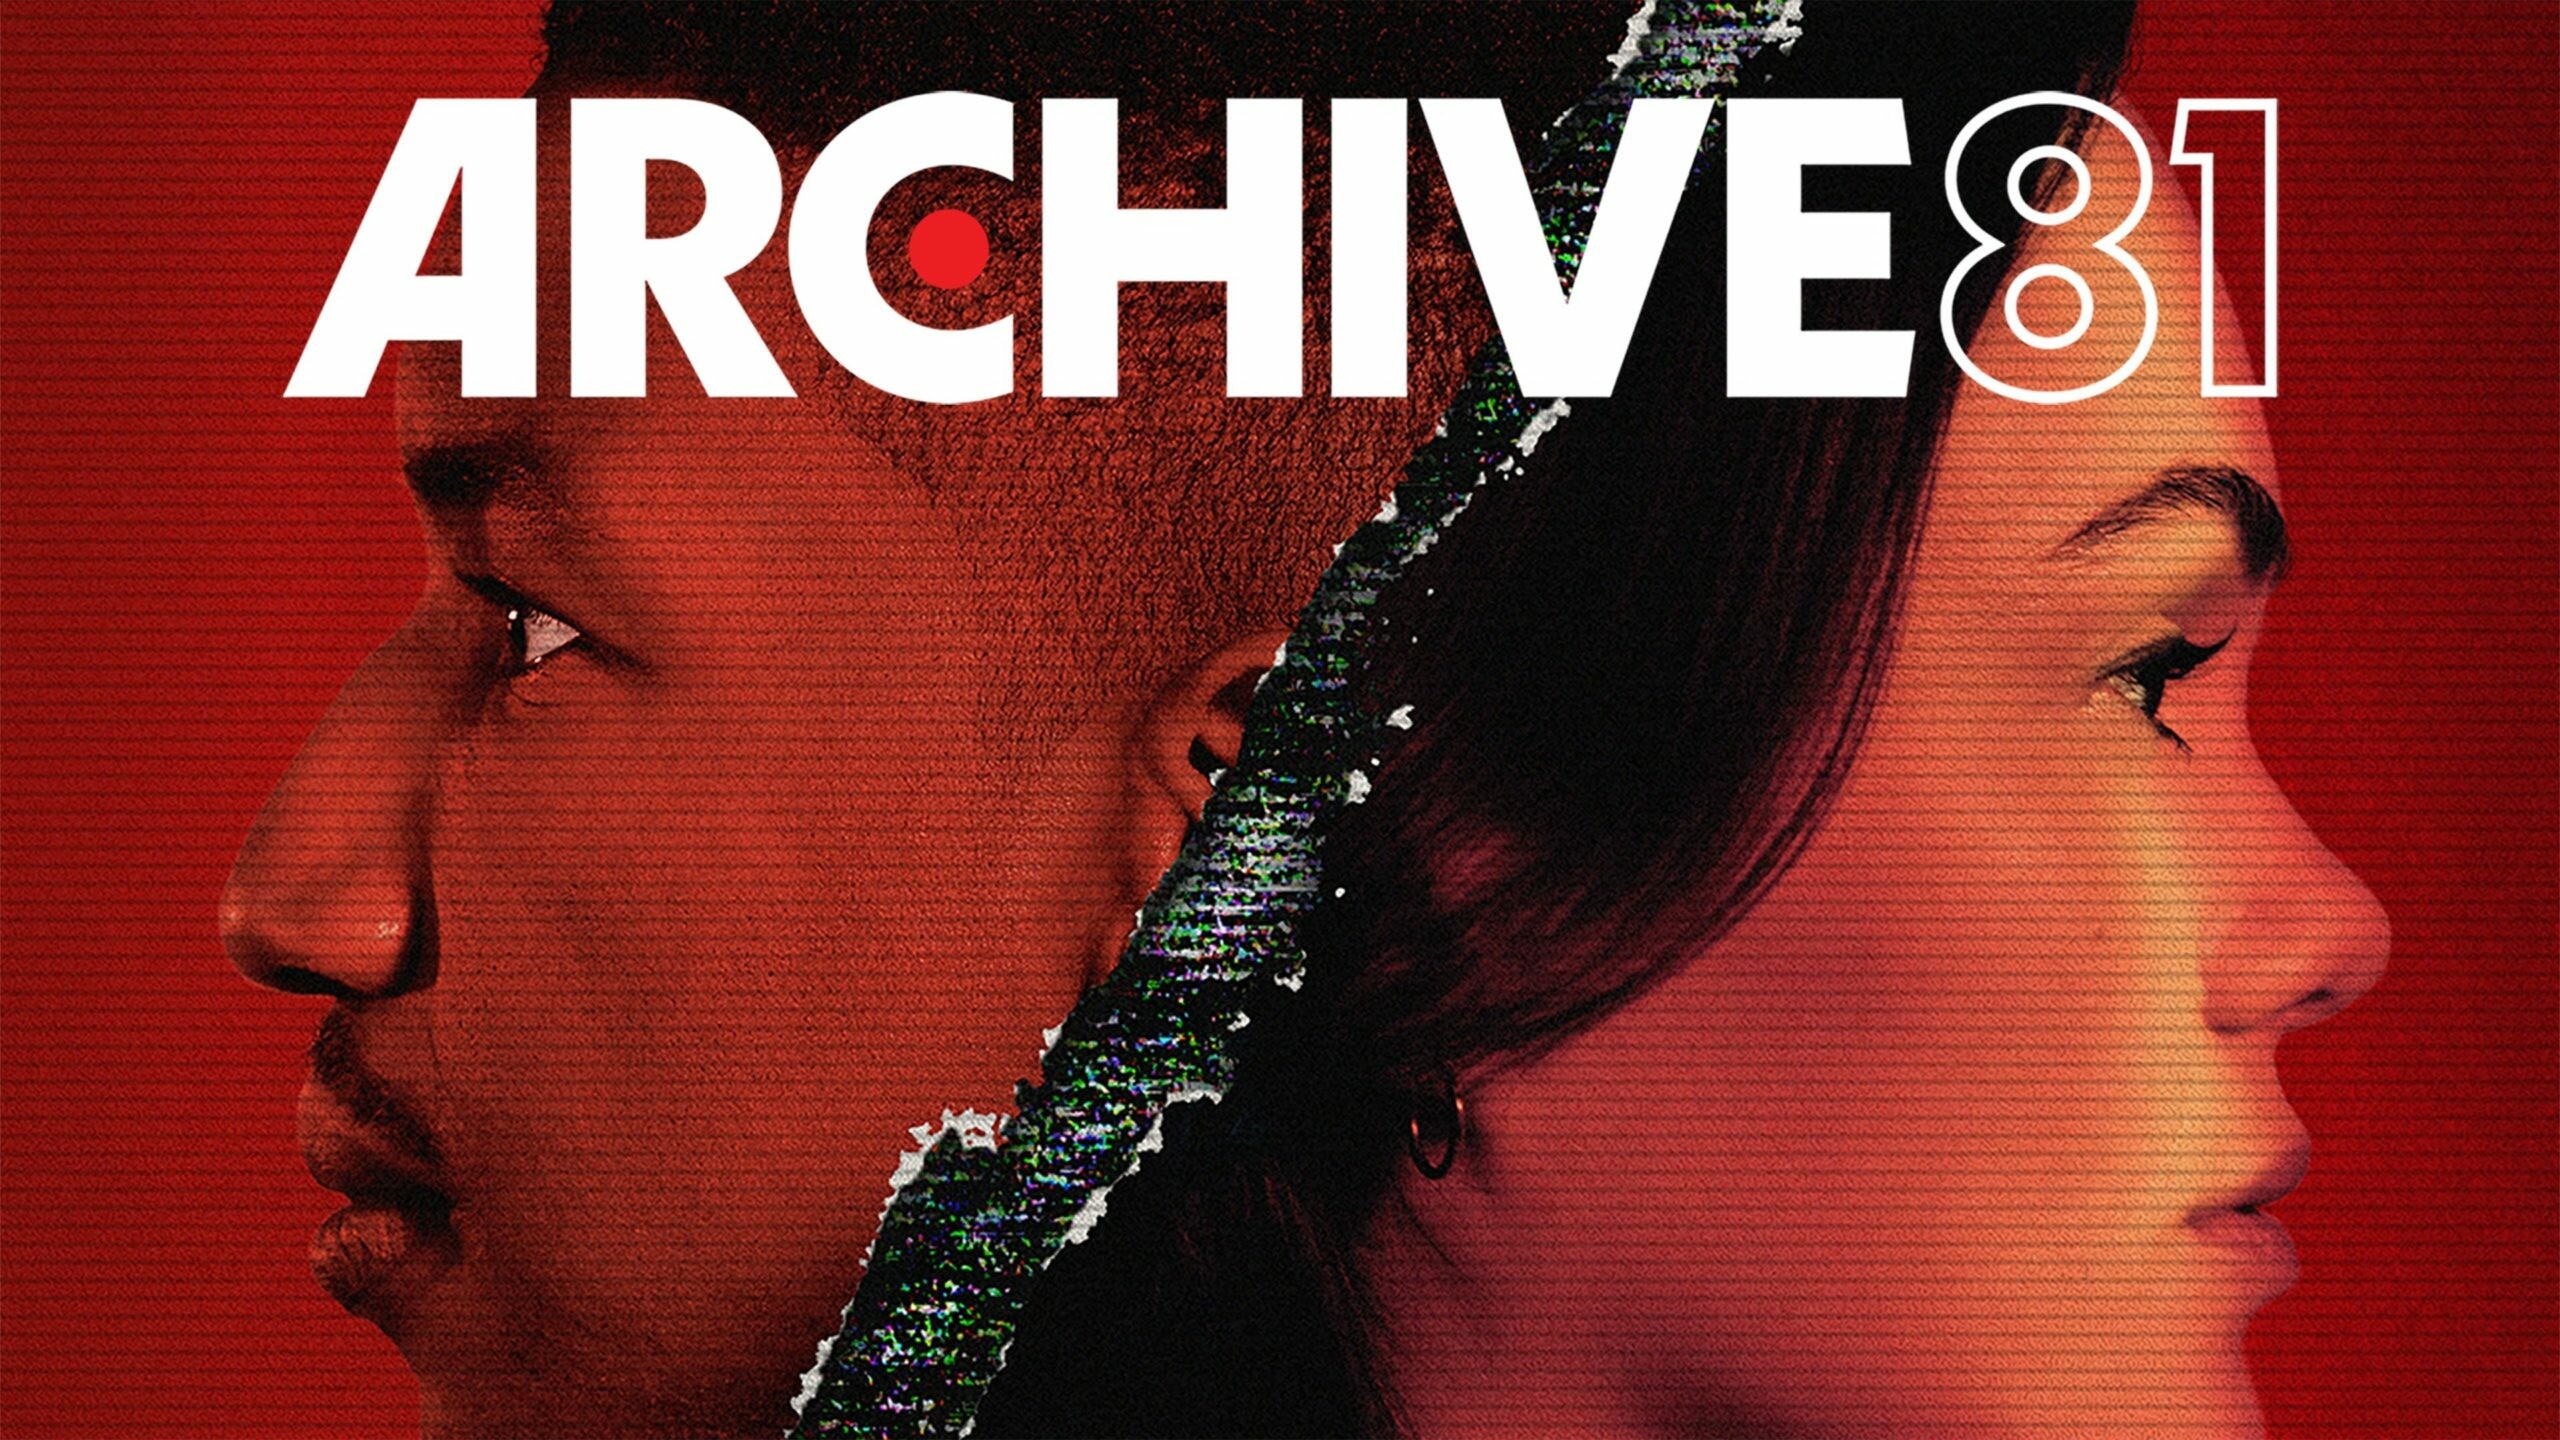 Archive 81 (TV Series): Television series developed by Rebecca Sonnenshine, Analogue horror. 2560x1440 HD Wallpaper.